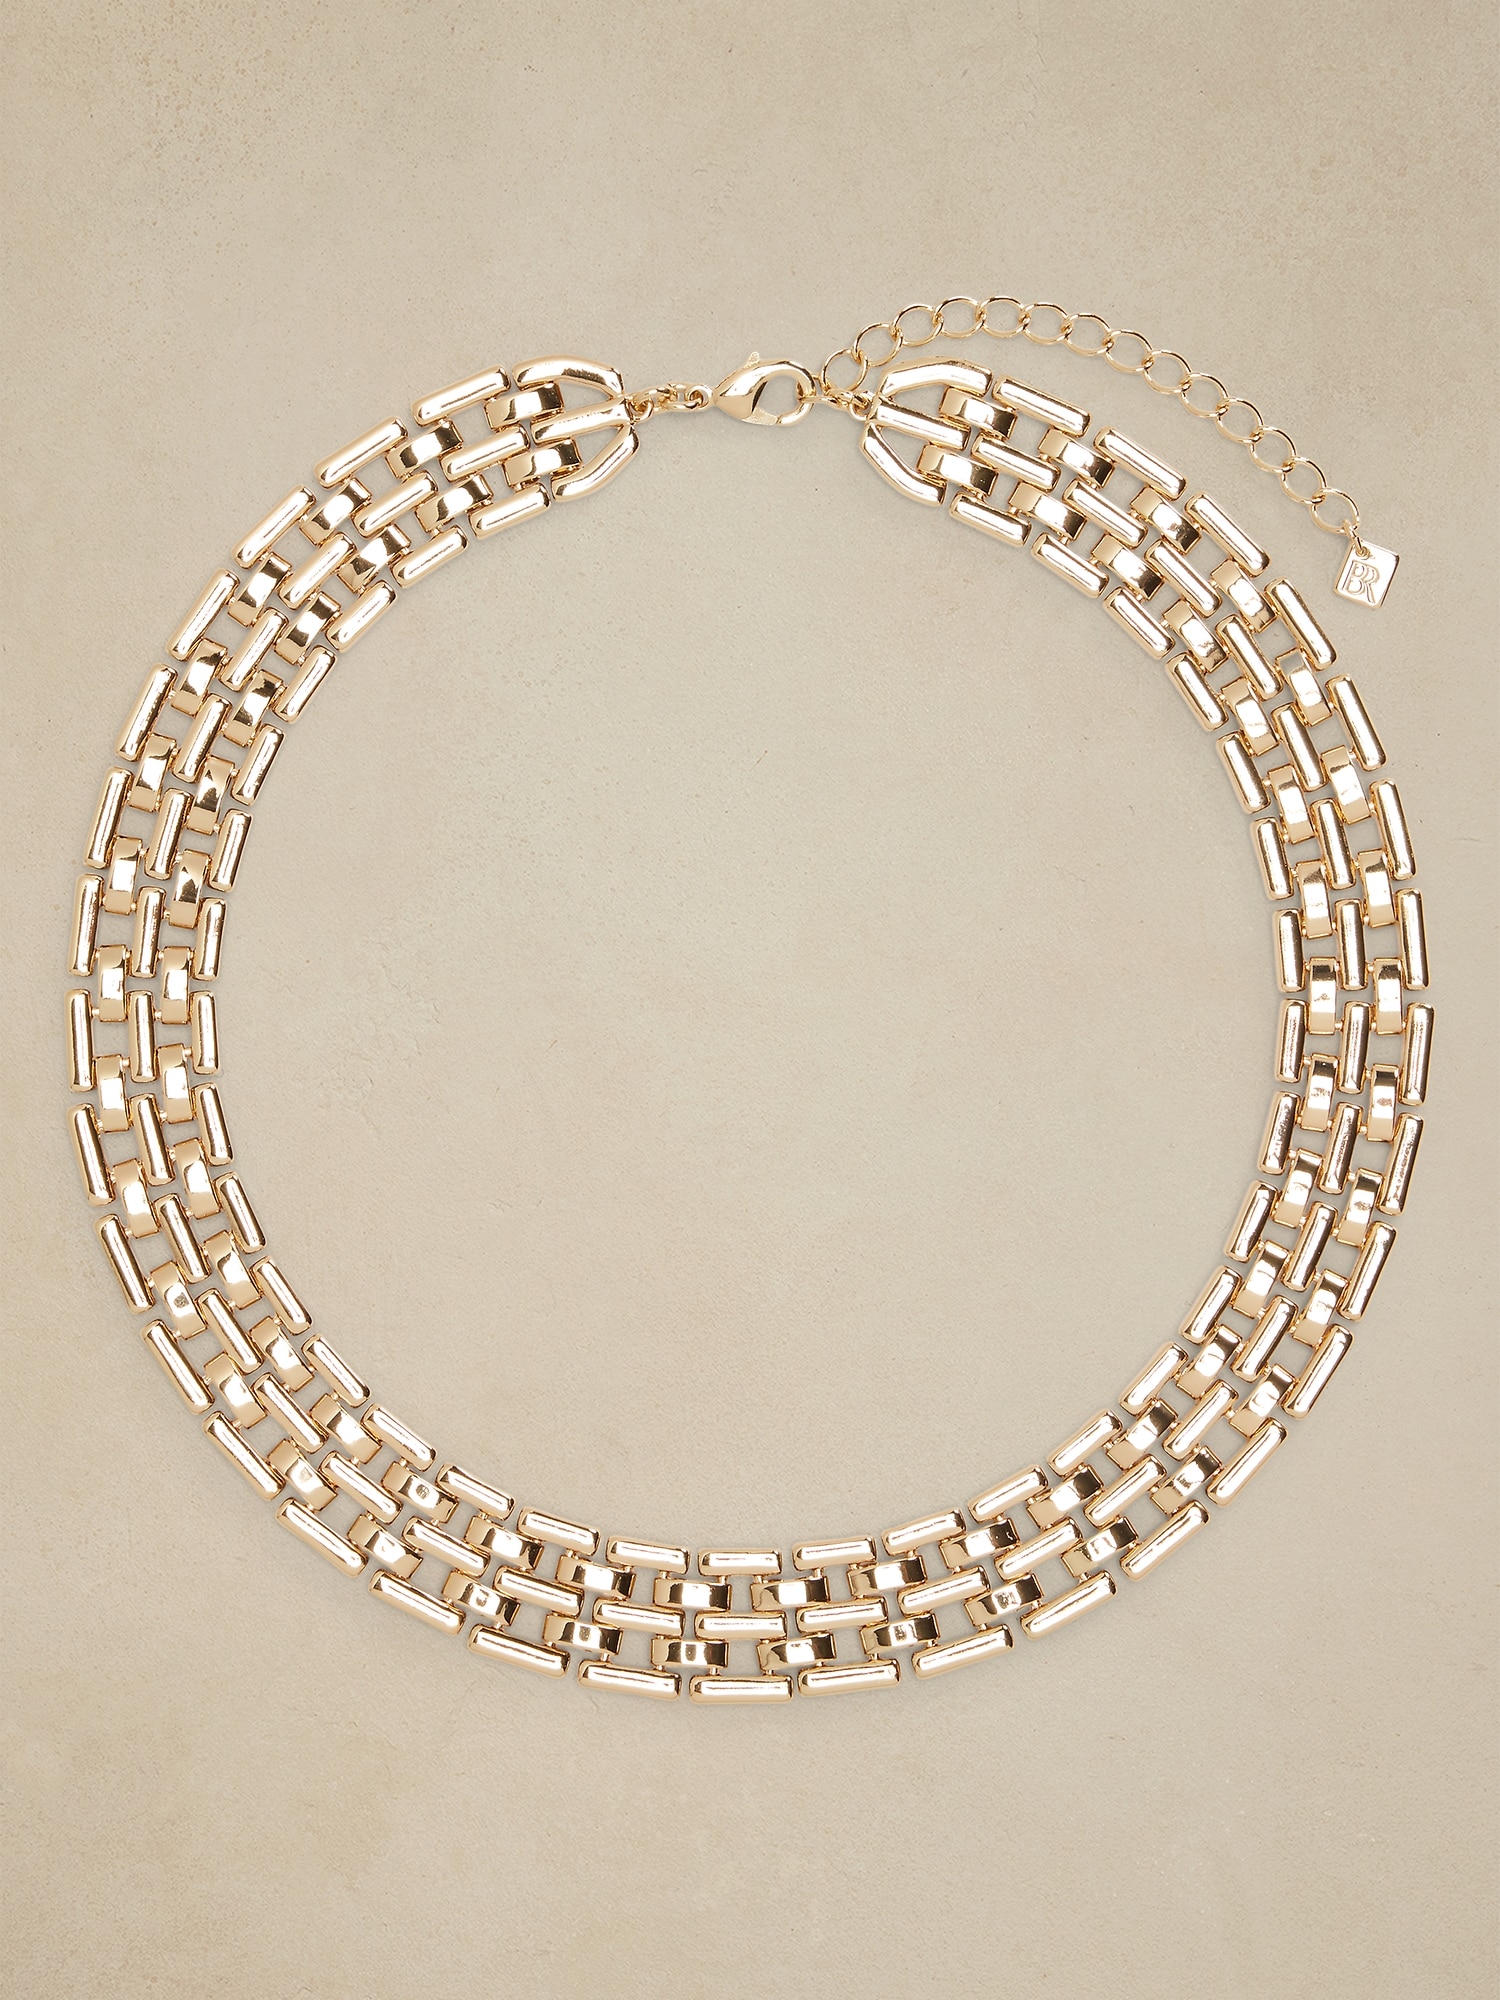 Watch Chain Collar Necklace